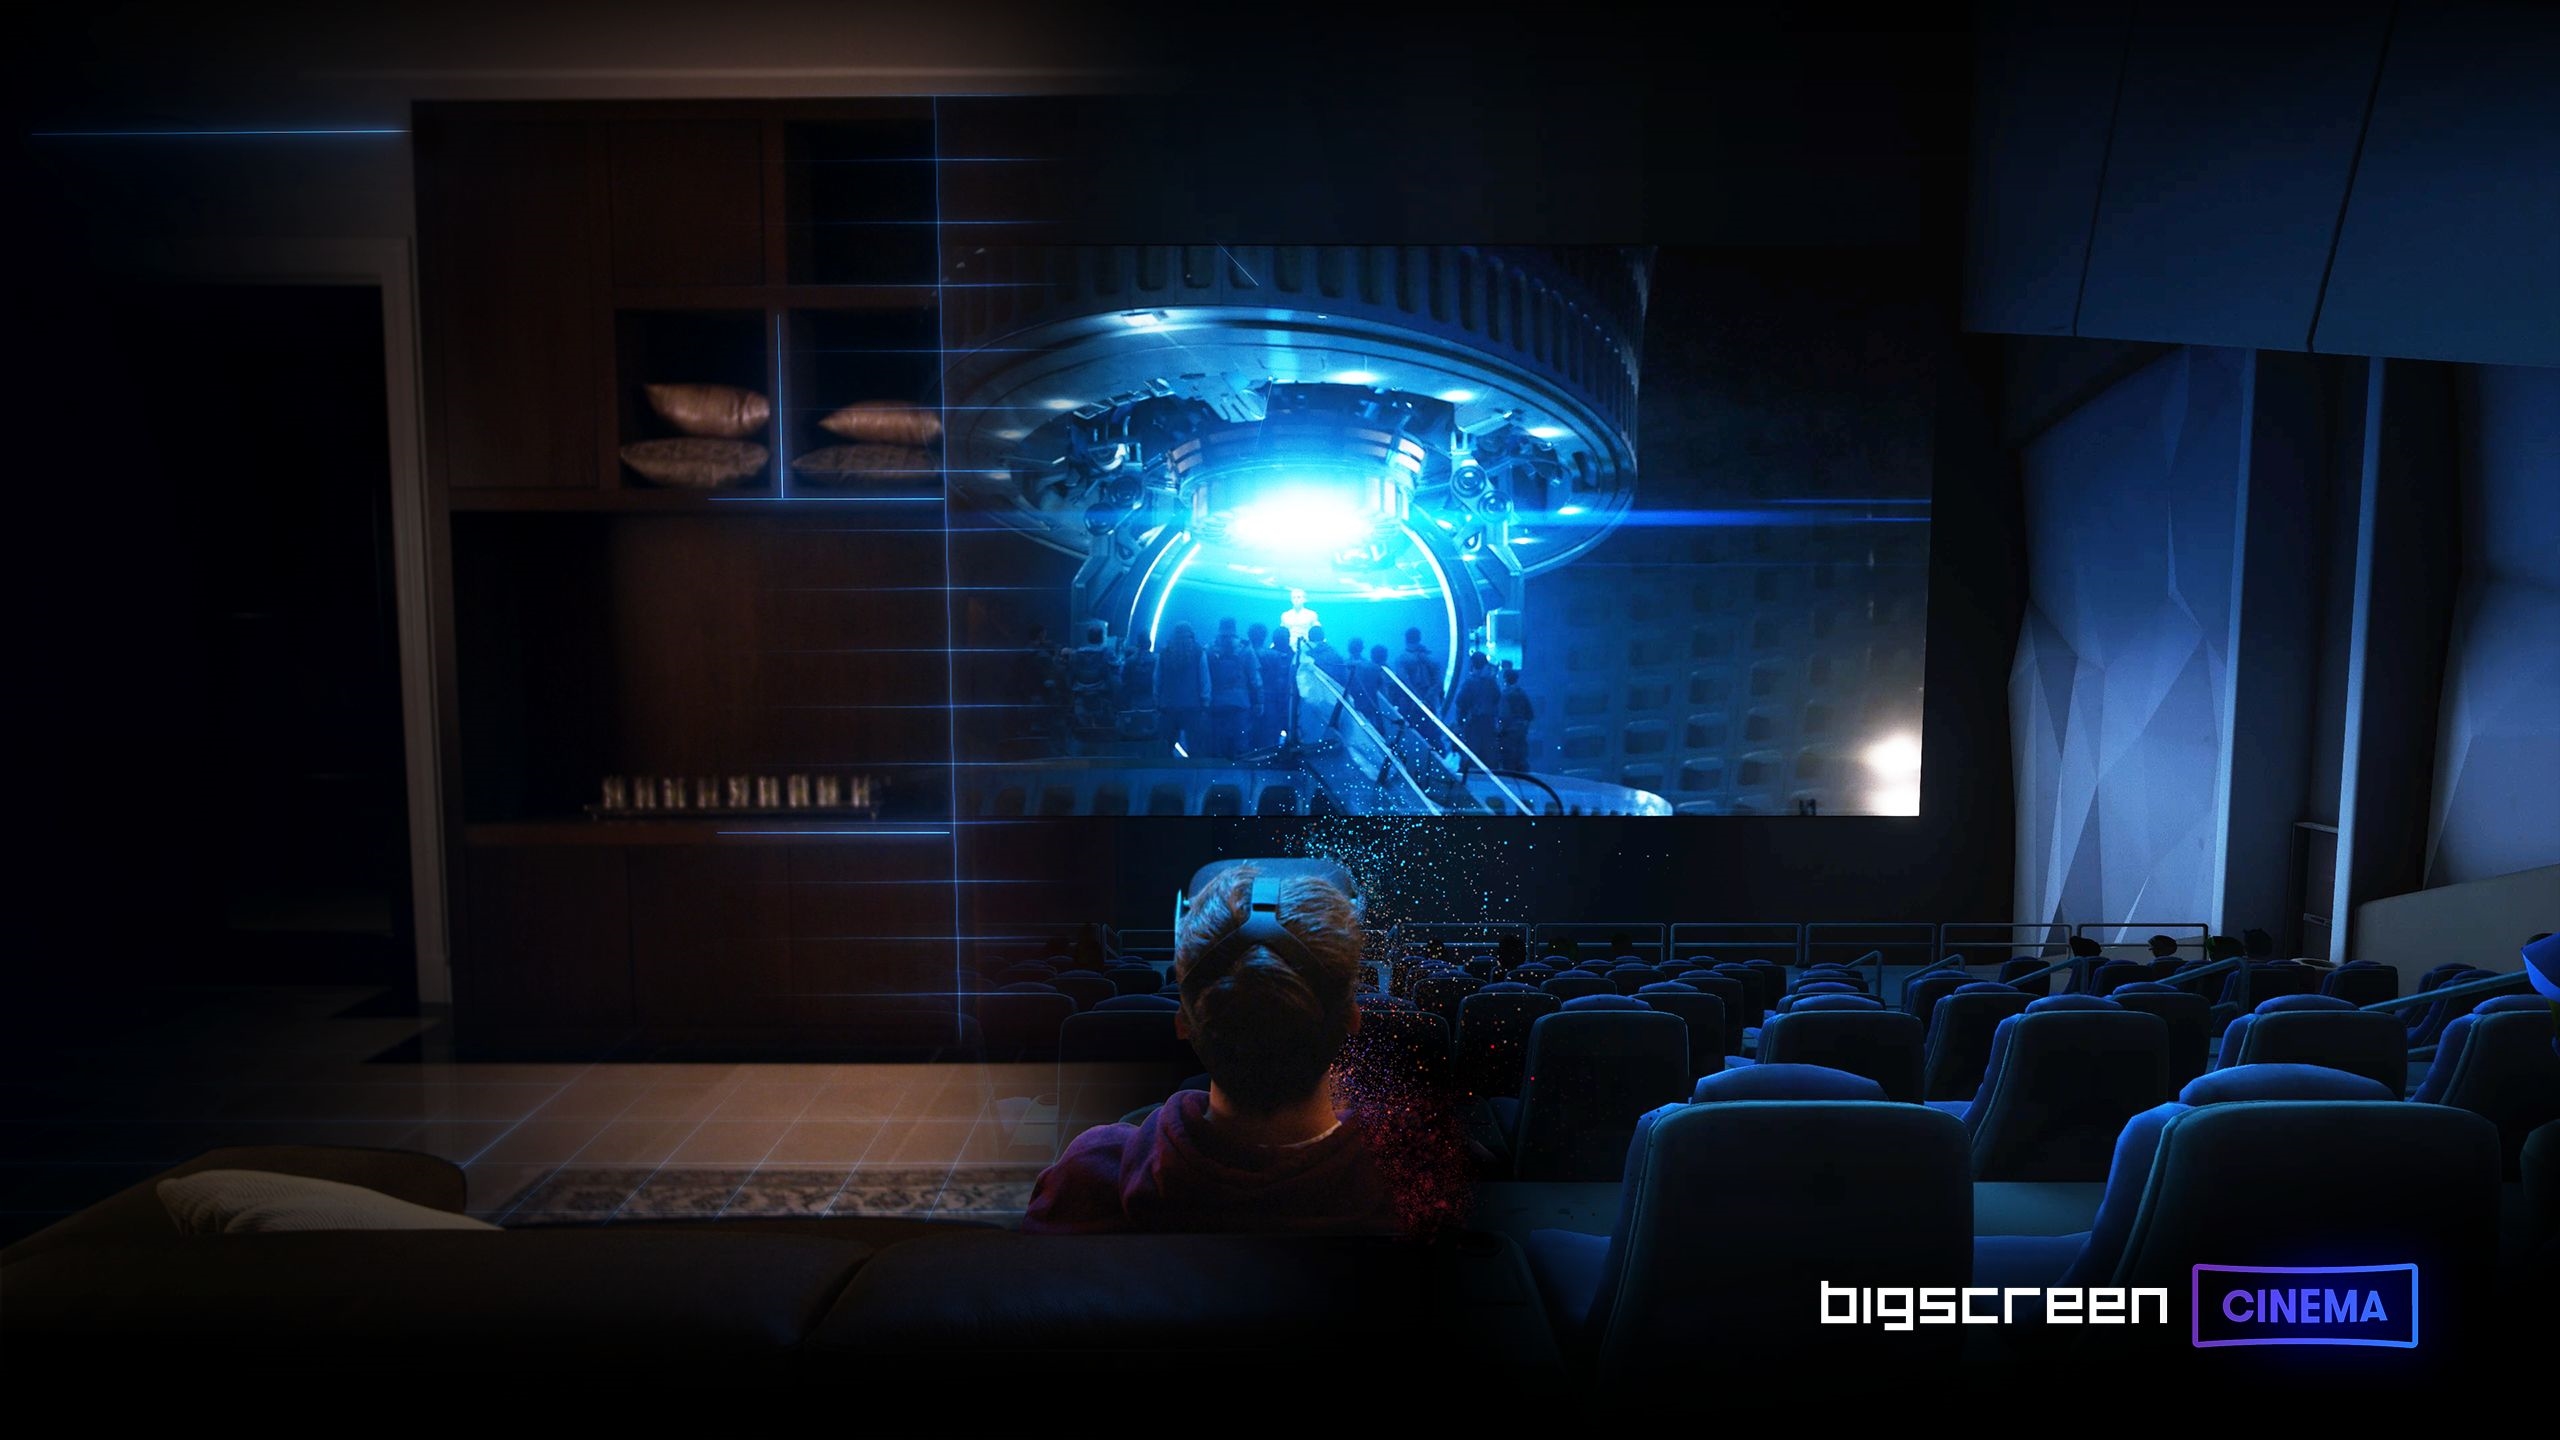 VR movie-watching service Bigscreen will offer Paramount films | DeviceDaily.com